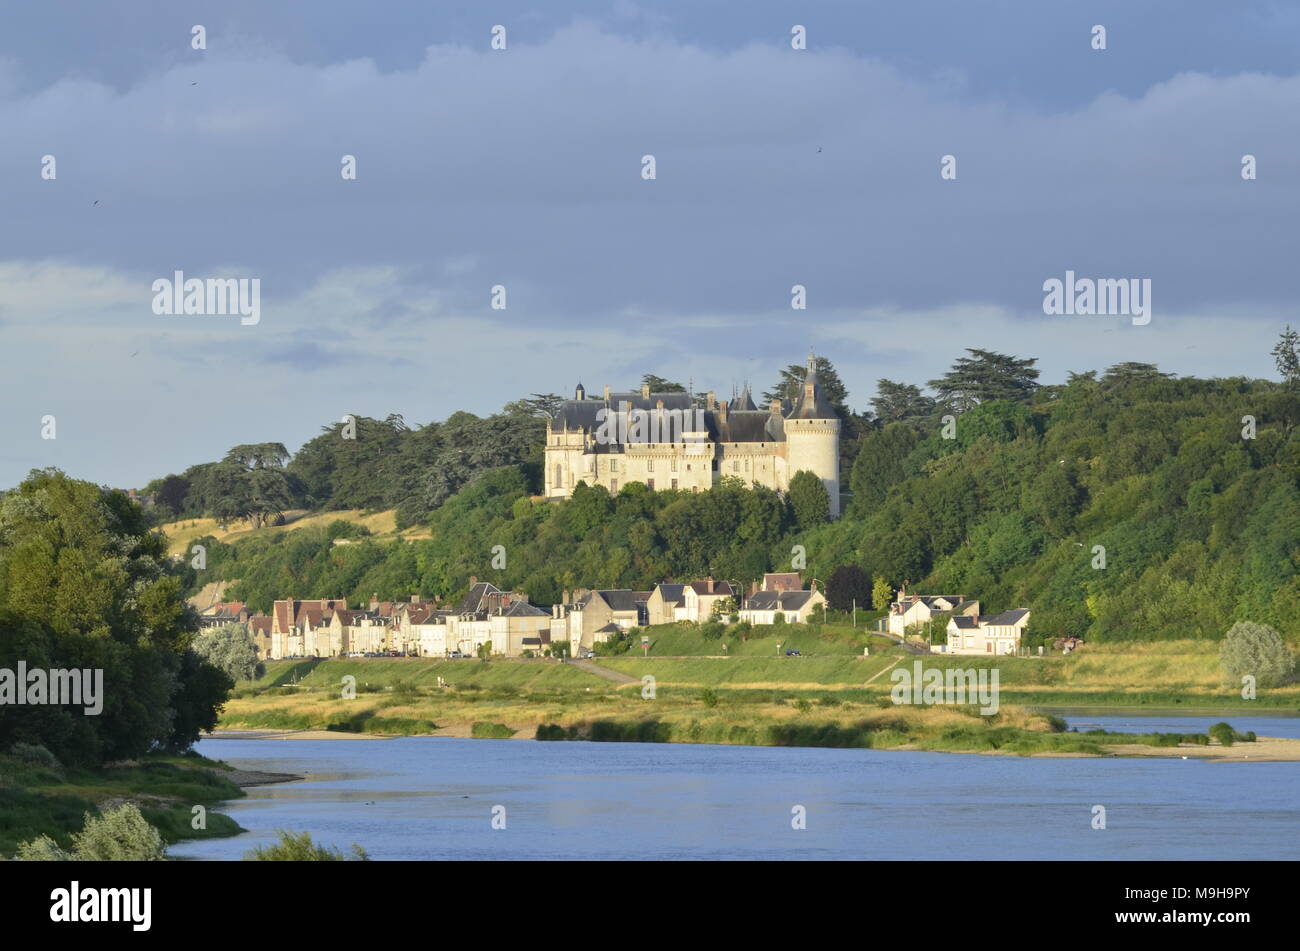 The castle of Chaumont sur Loire 29 June 2017 20:16 Loire Valley, France. Photo taken from the opposite Riverside of the river Loire. Stock Photo